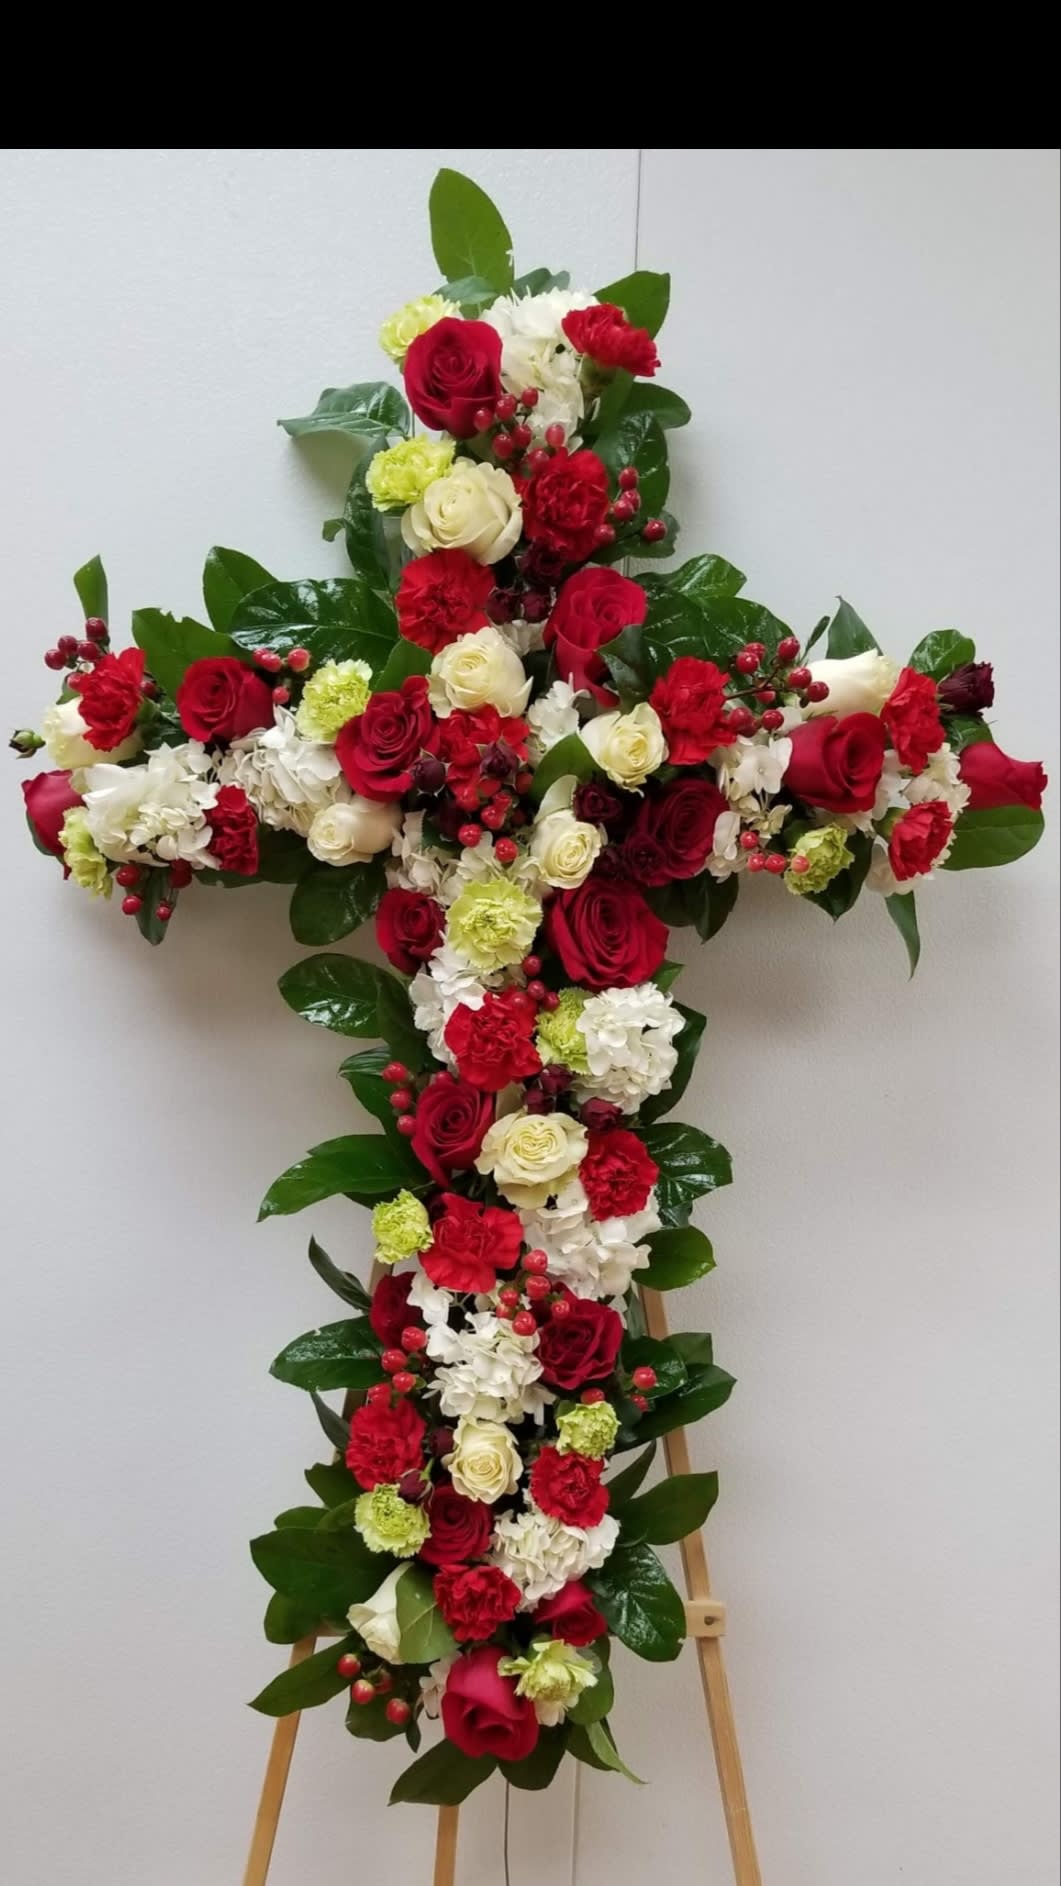 Red Carnation Funeral Flower Cross, Cross With Flowers For Funeral